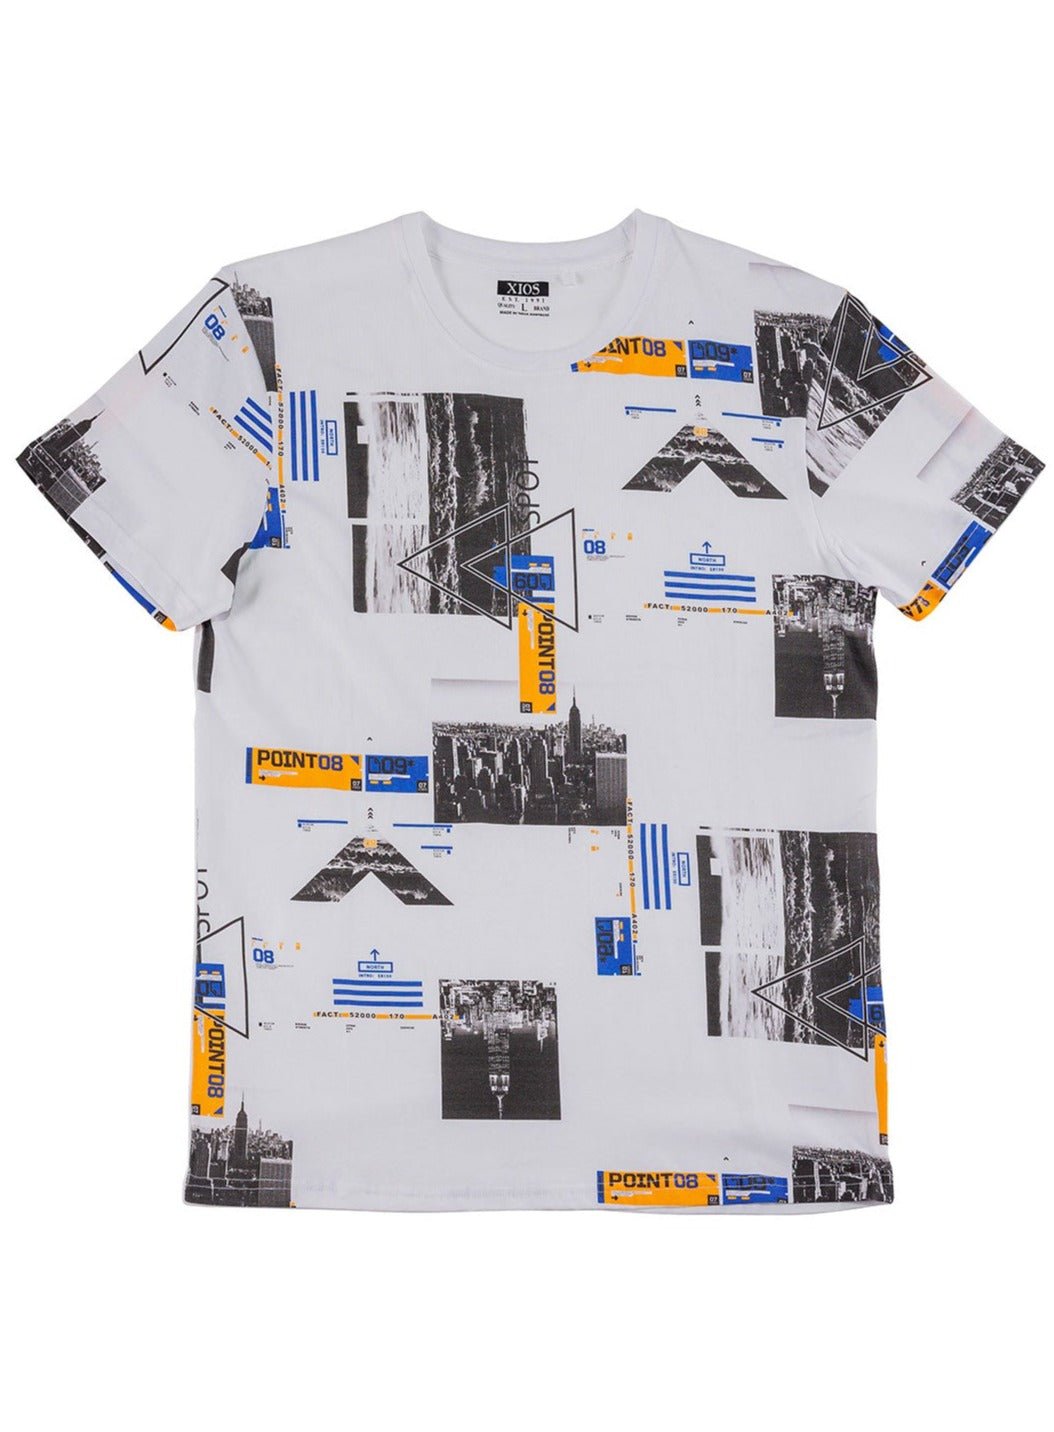 "Point 08" Graphic Tee